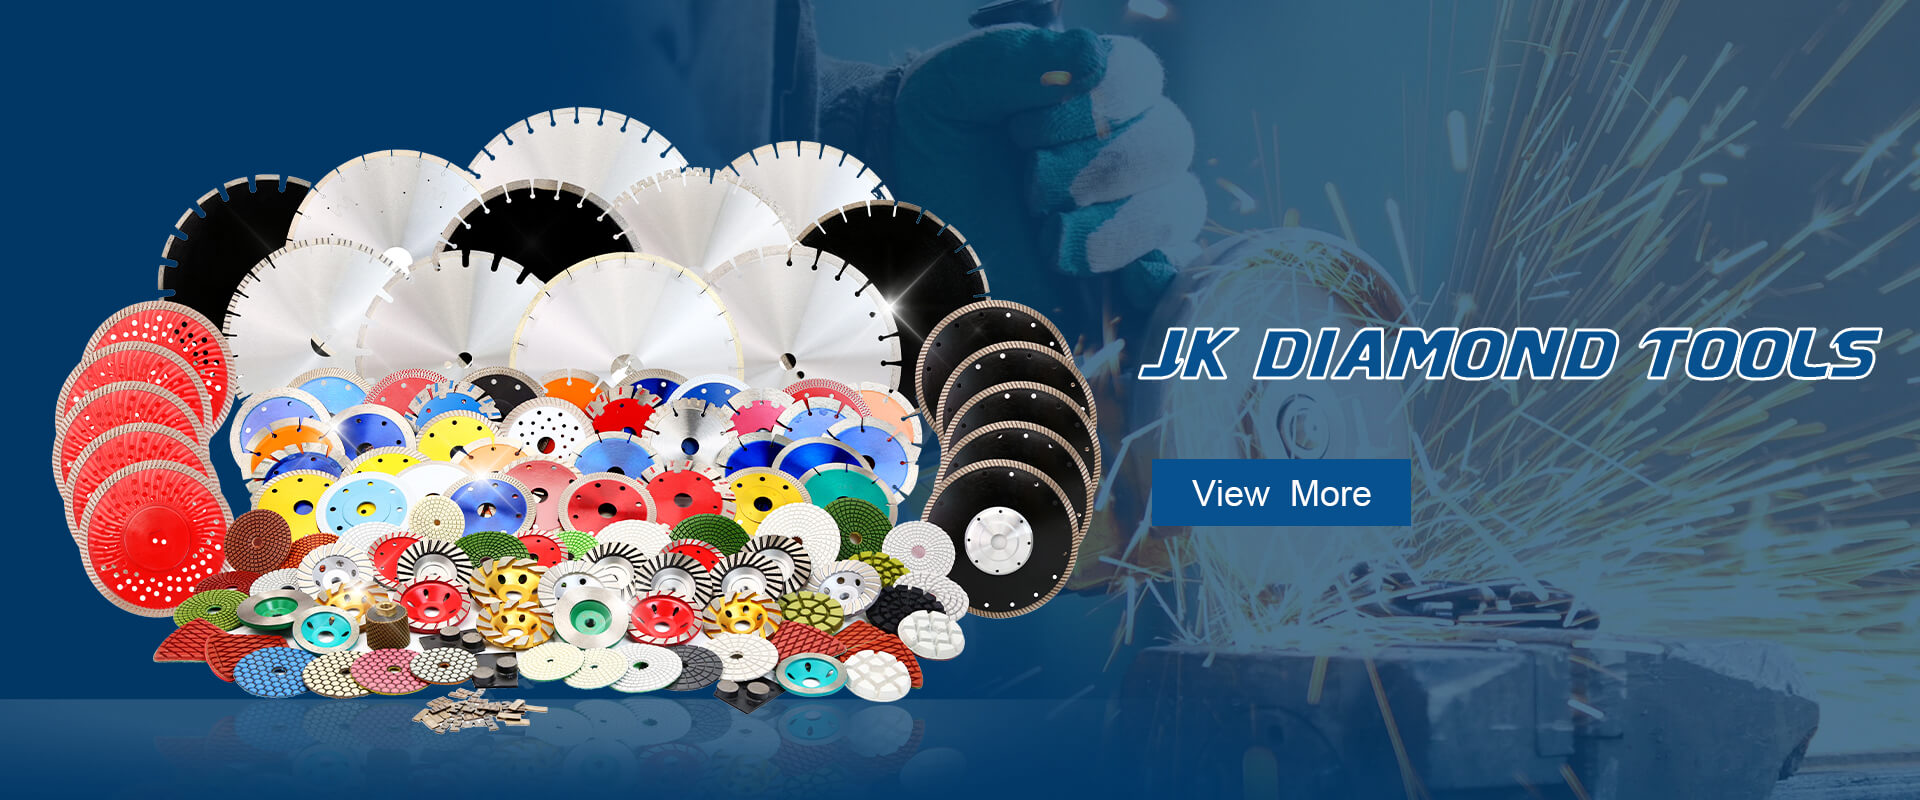 Cup Wheel Manufacturers